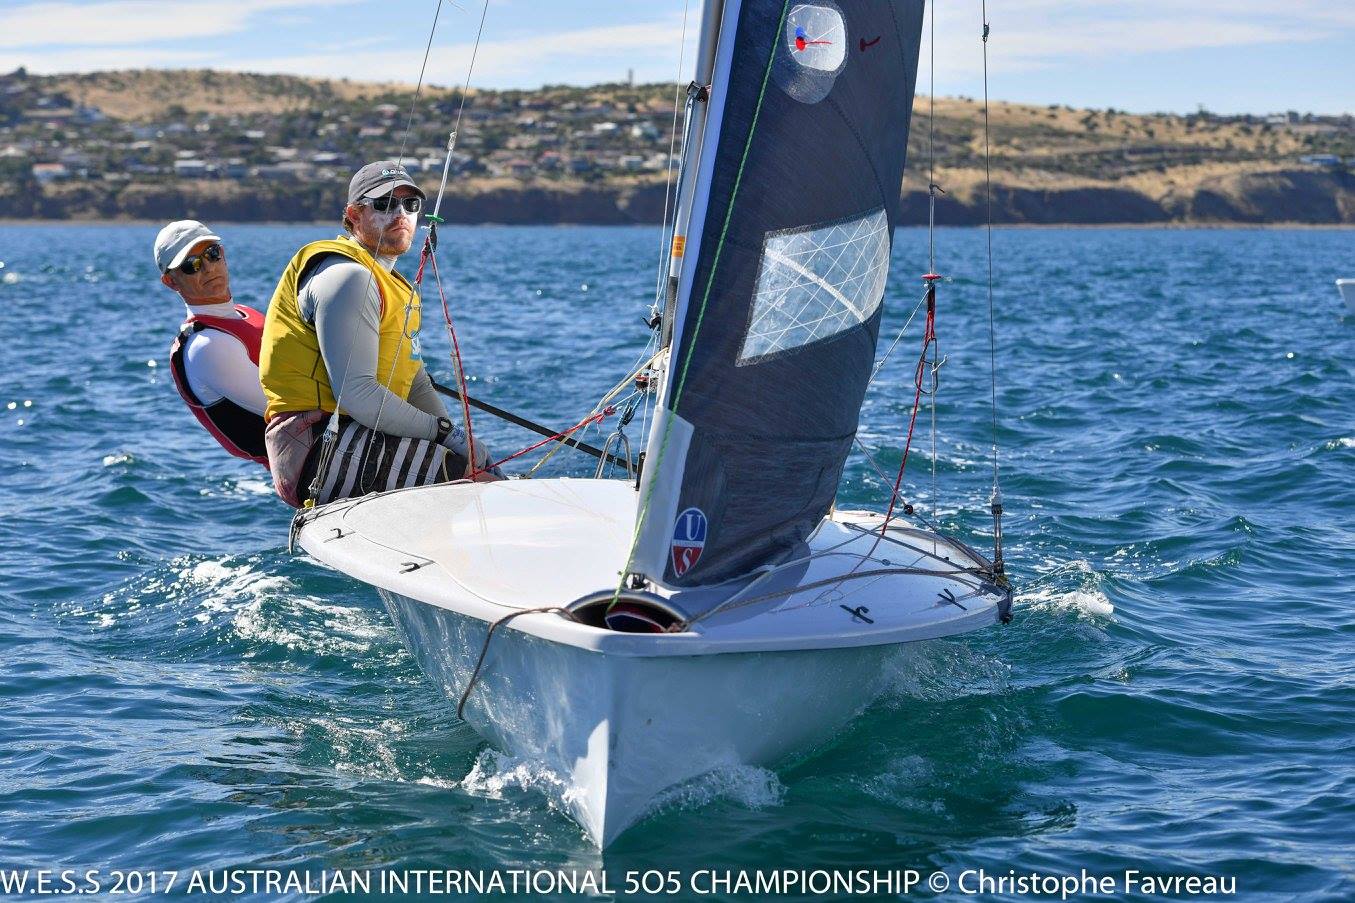 Michael Quirk and Reeve Dunne finished second in the opening race. Photos: Christophe Favreau